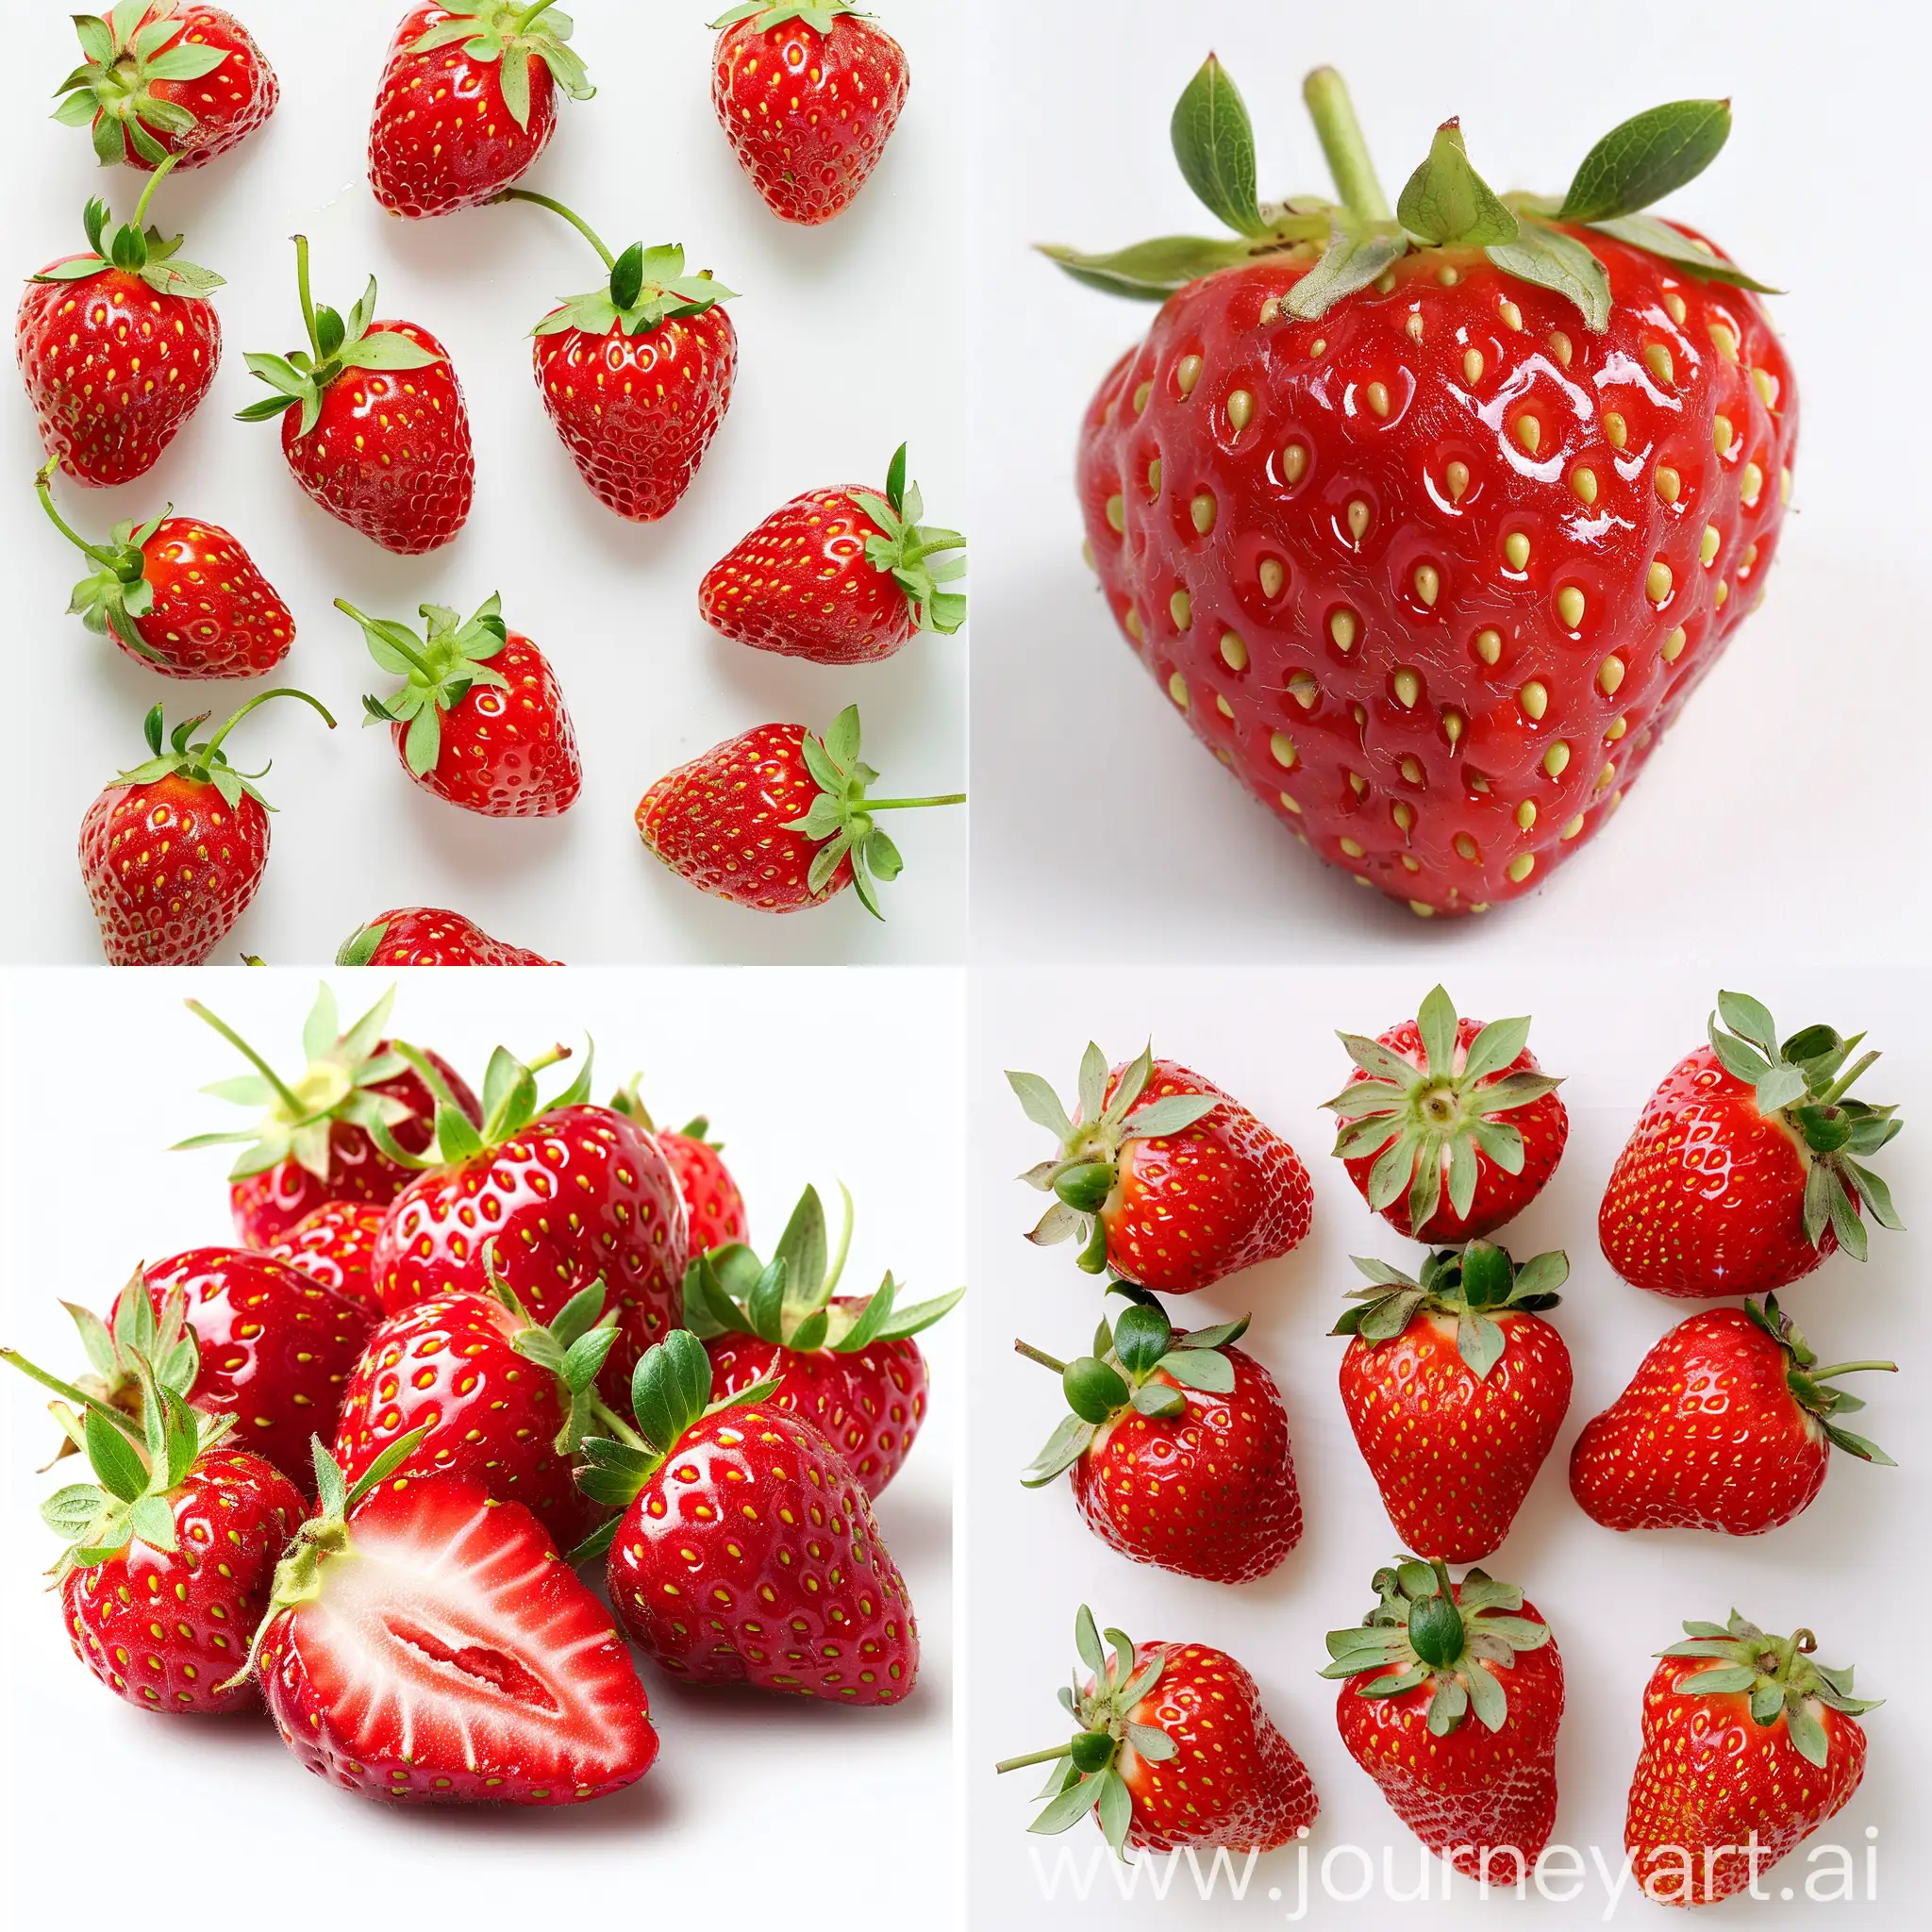 Vibrant-Strawberry-on-a-Clean-White-Background